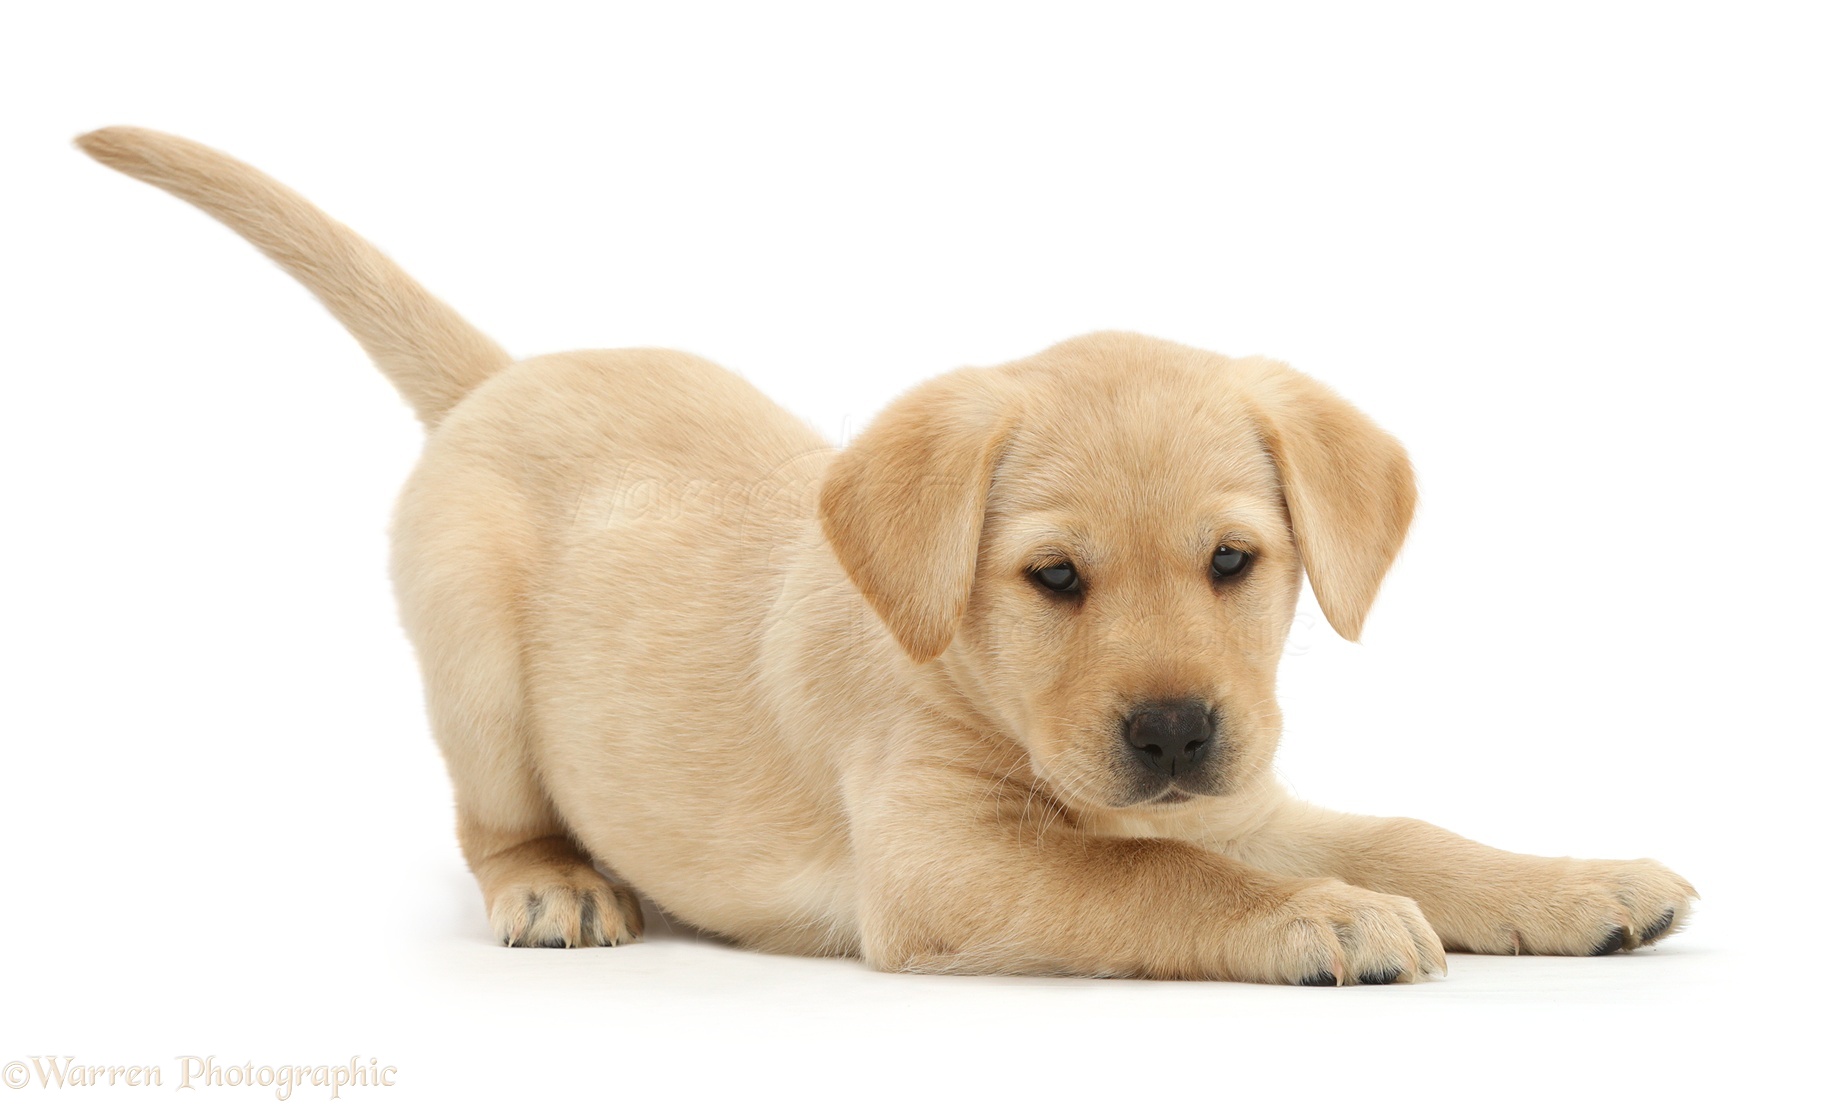 Dog: Cute Yellow Labrador puppy in play-bow photo WP41059